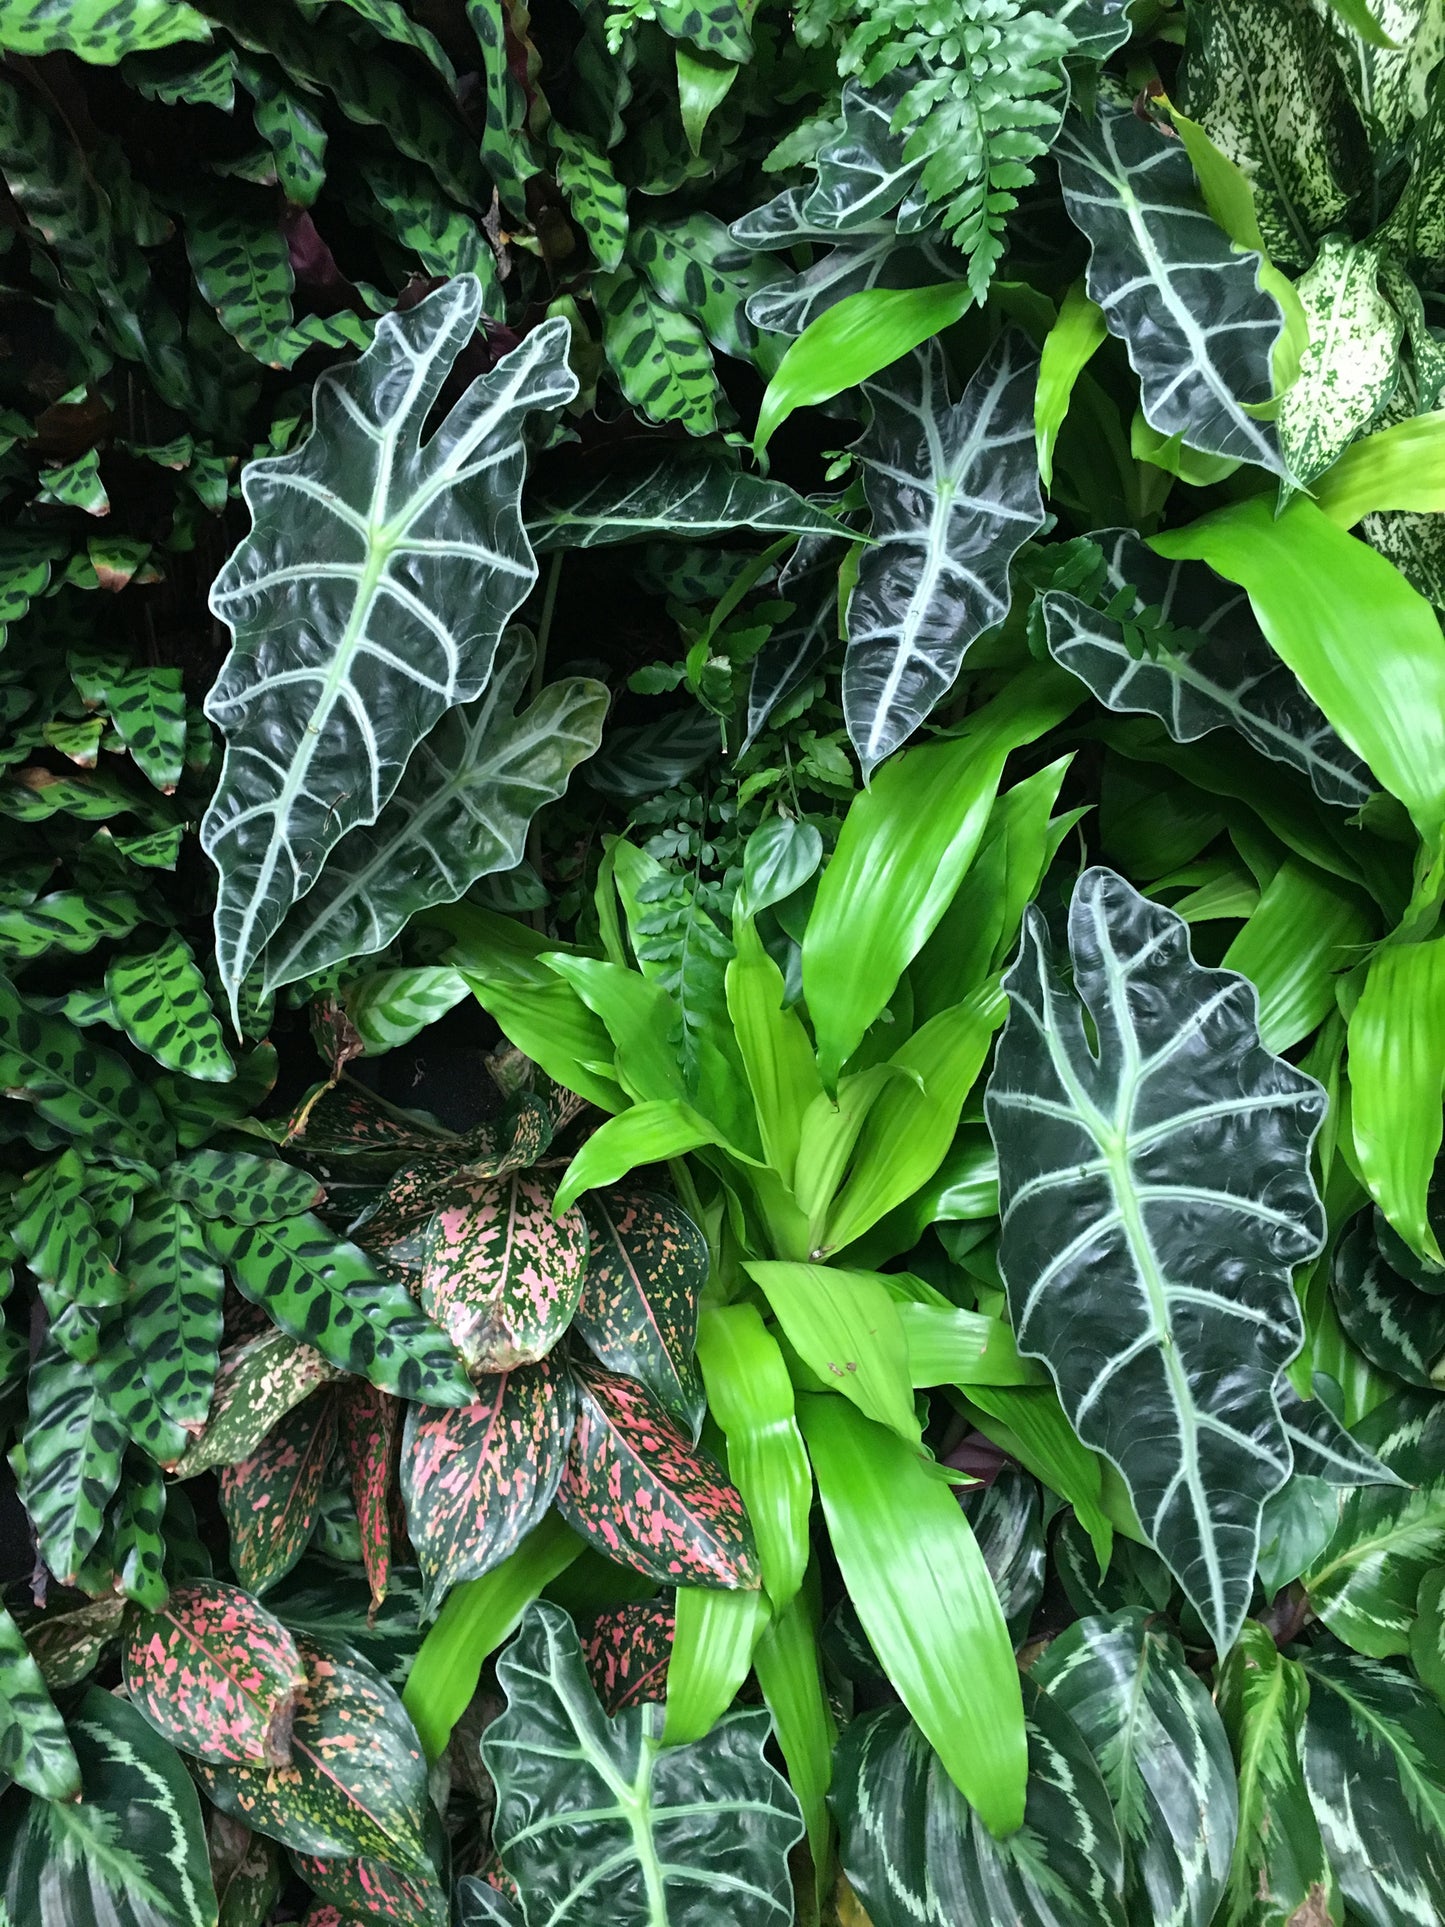 "Bring the Outdoors Inside", Plant Wall Photography, Tropical Greenery, Bohemian Style